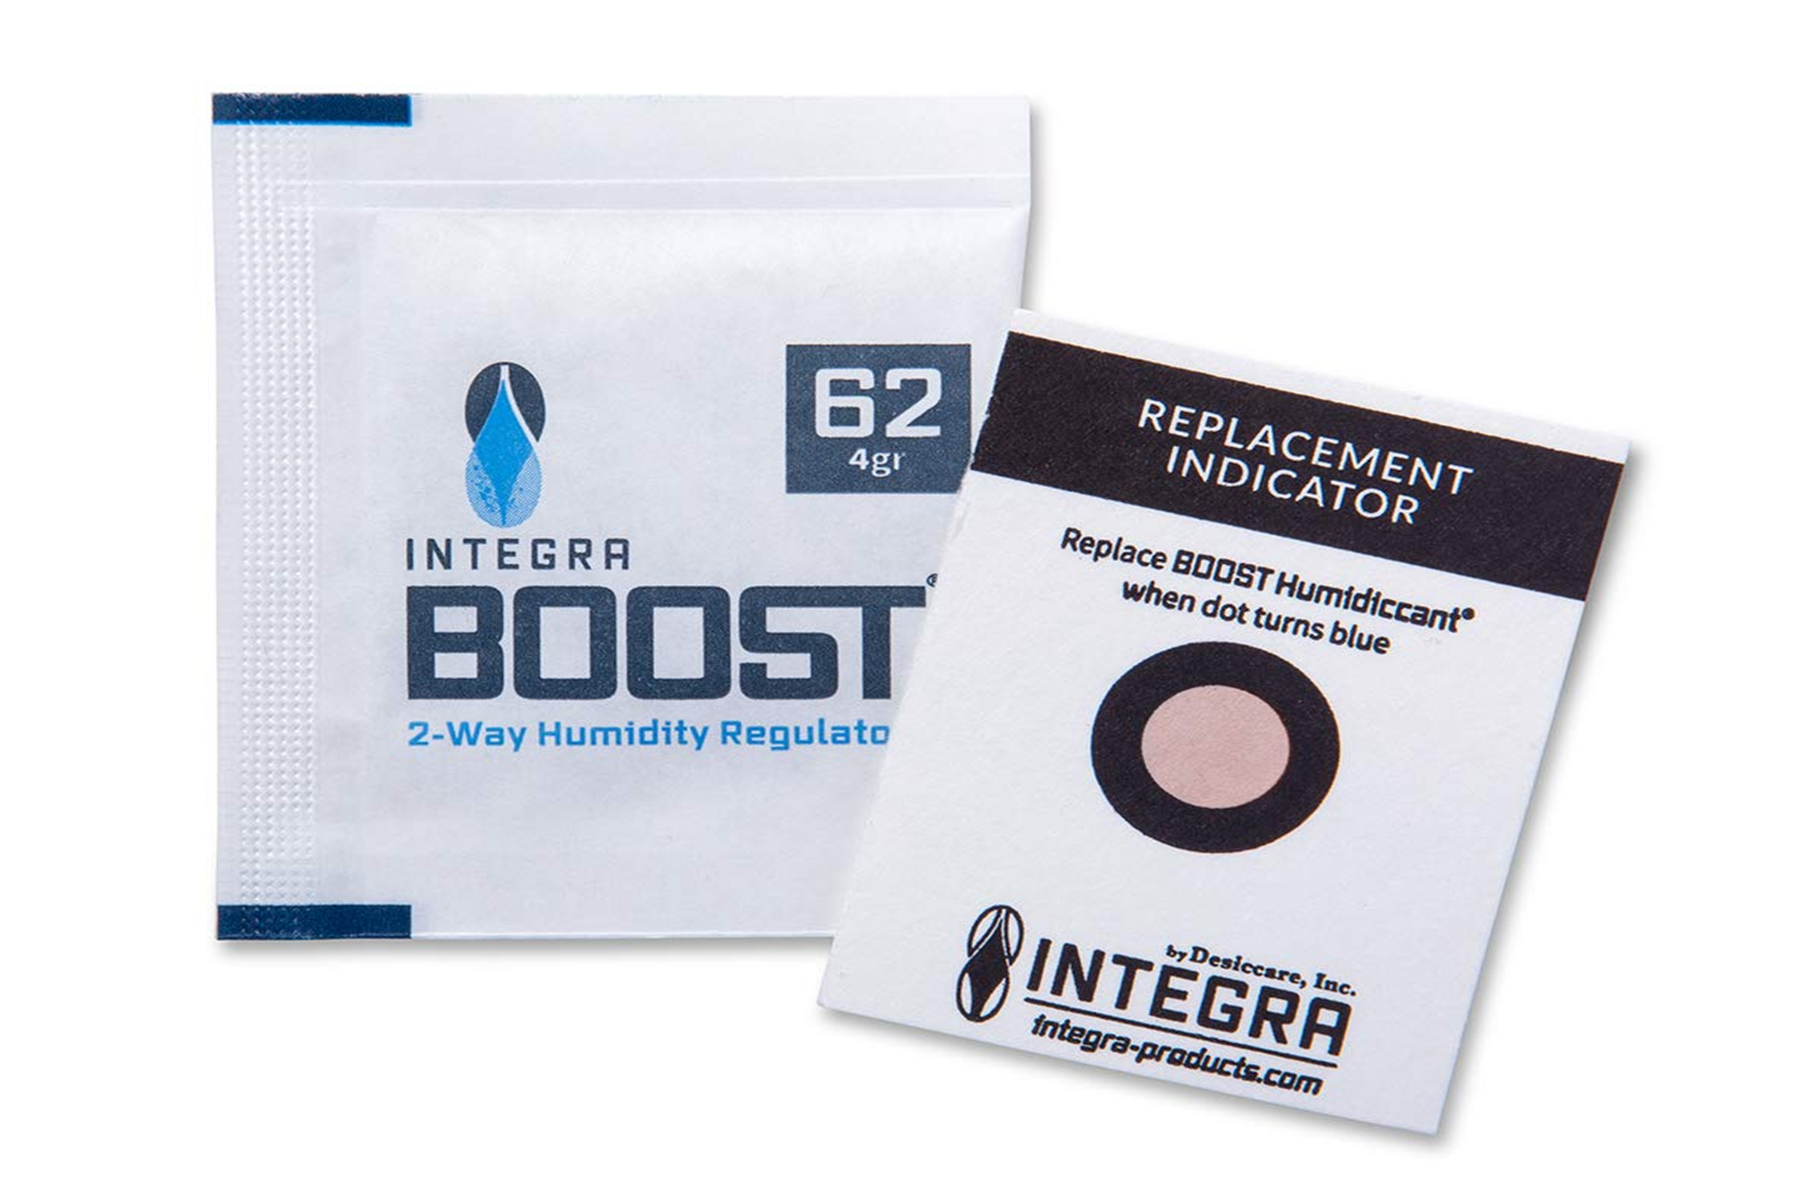 Desiccare 4-gram Integra BOOST® 62% RH 2-way humidity control packs with HIC